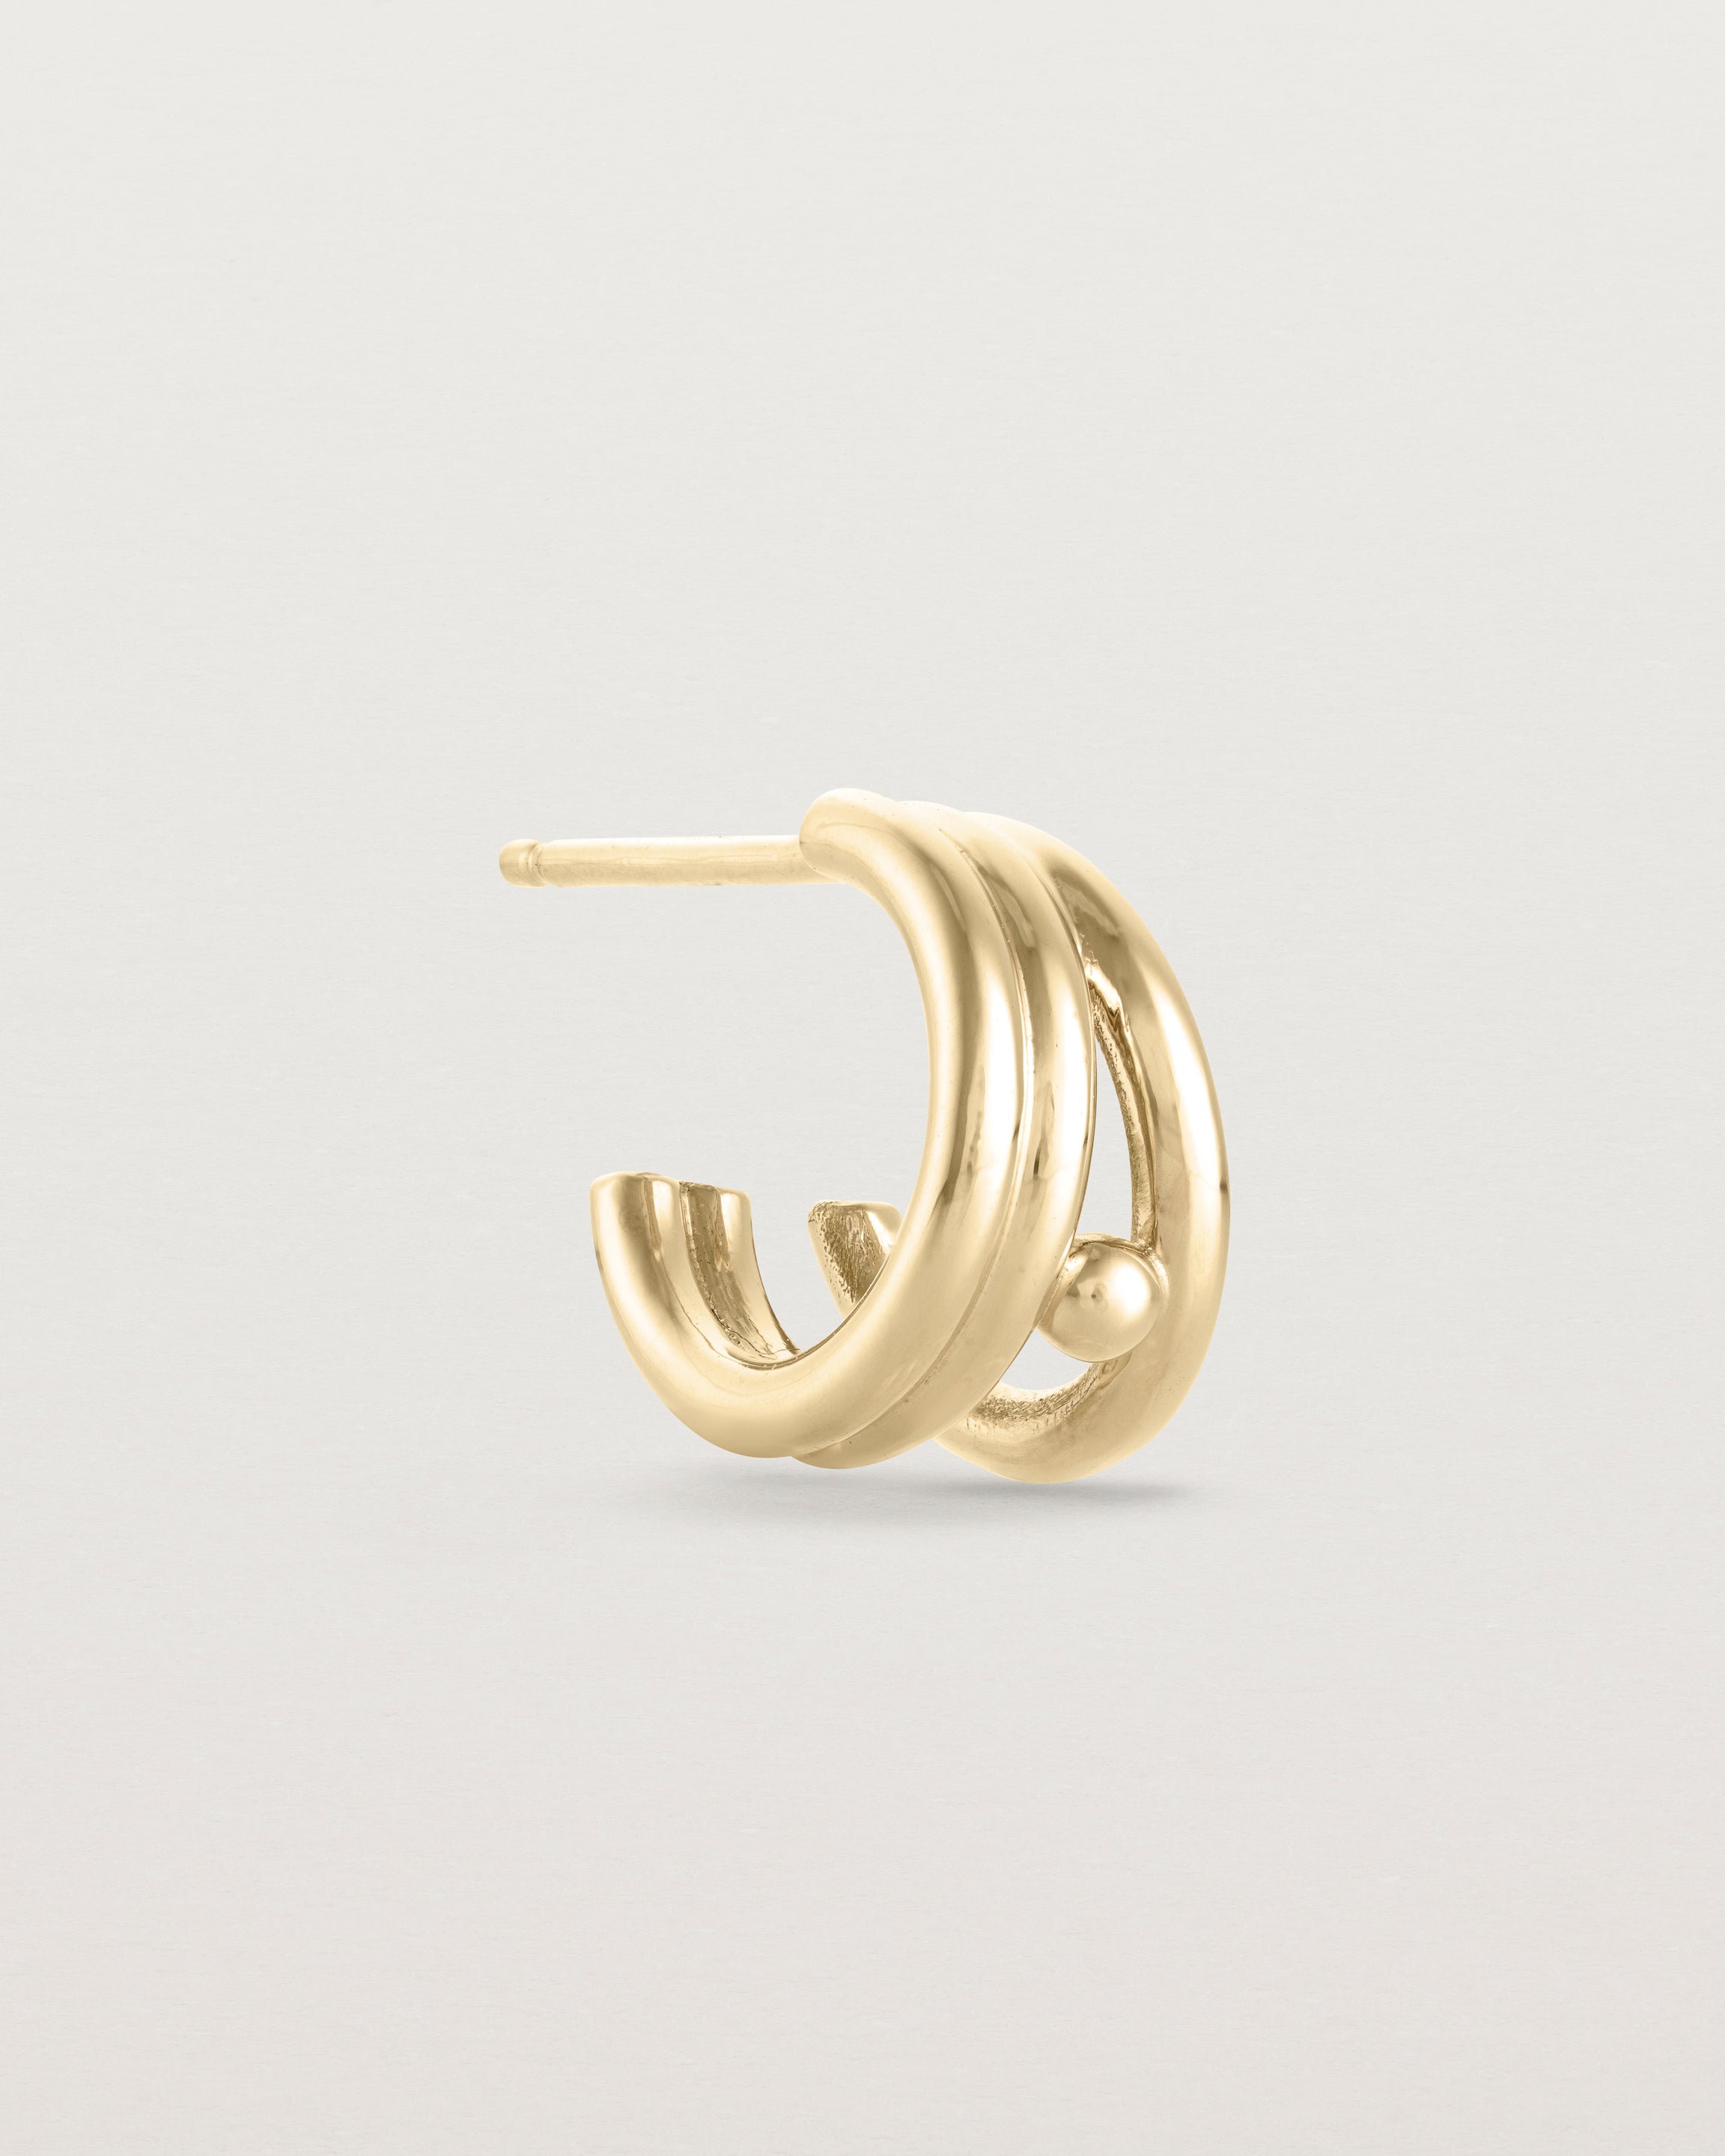 A single Triple Reliquum Hoop in yellow gold.